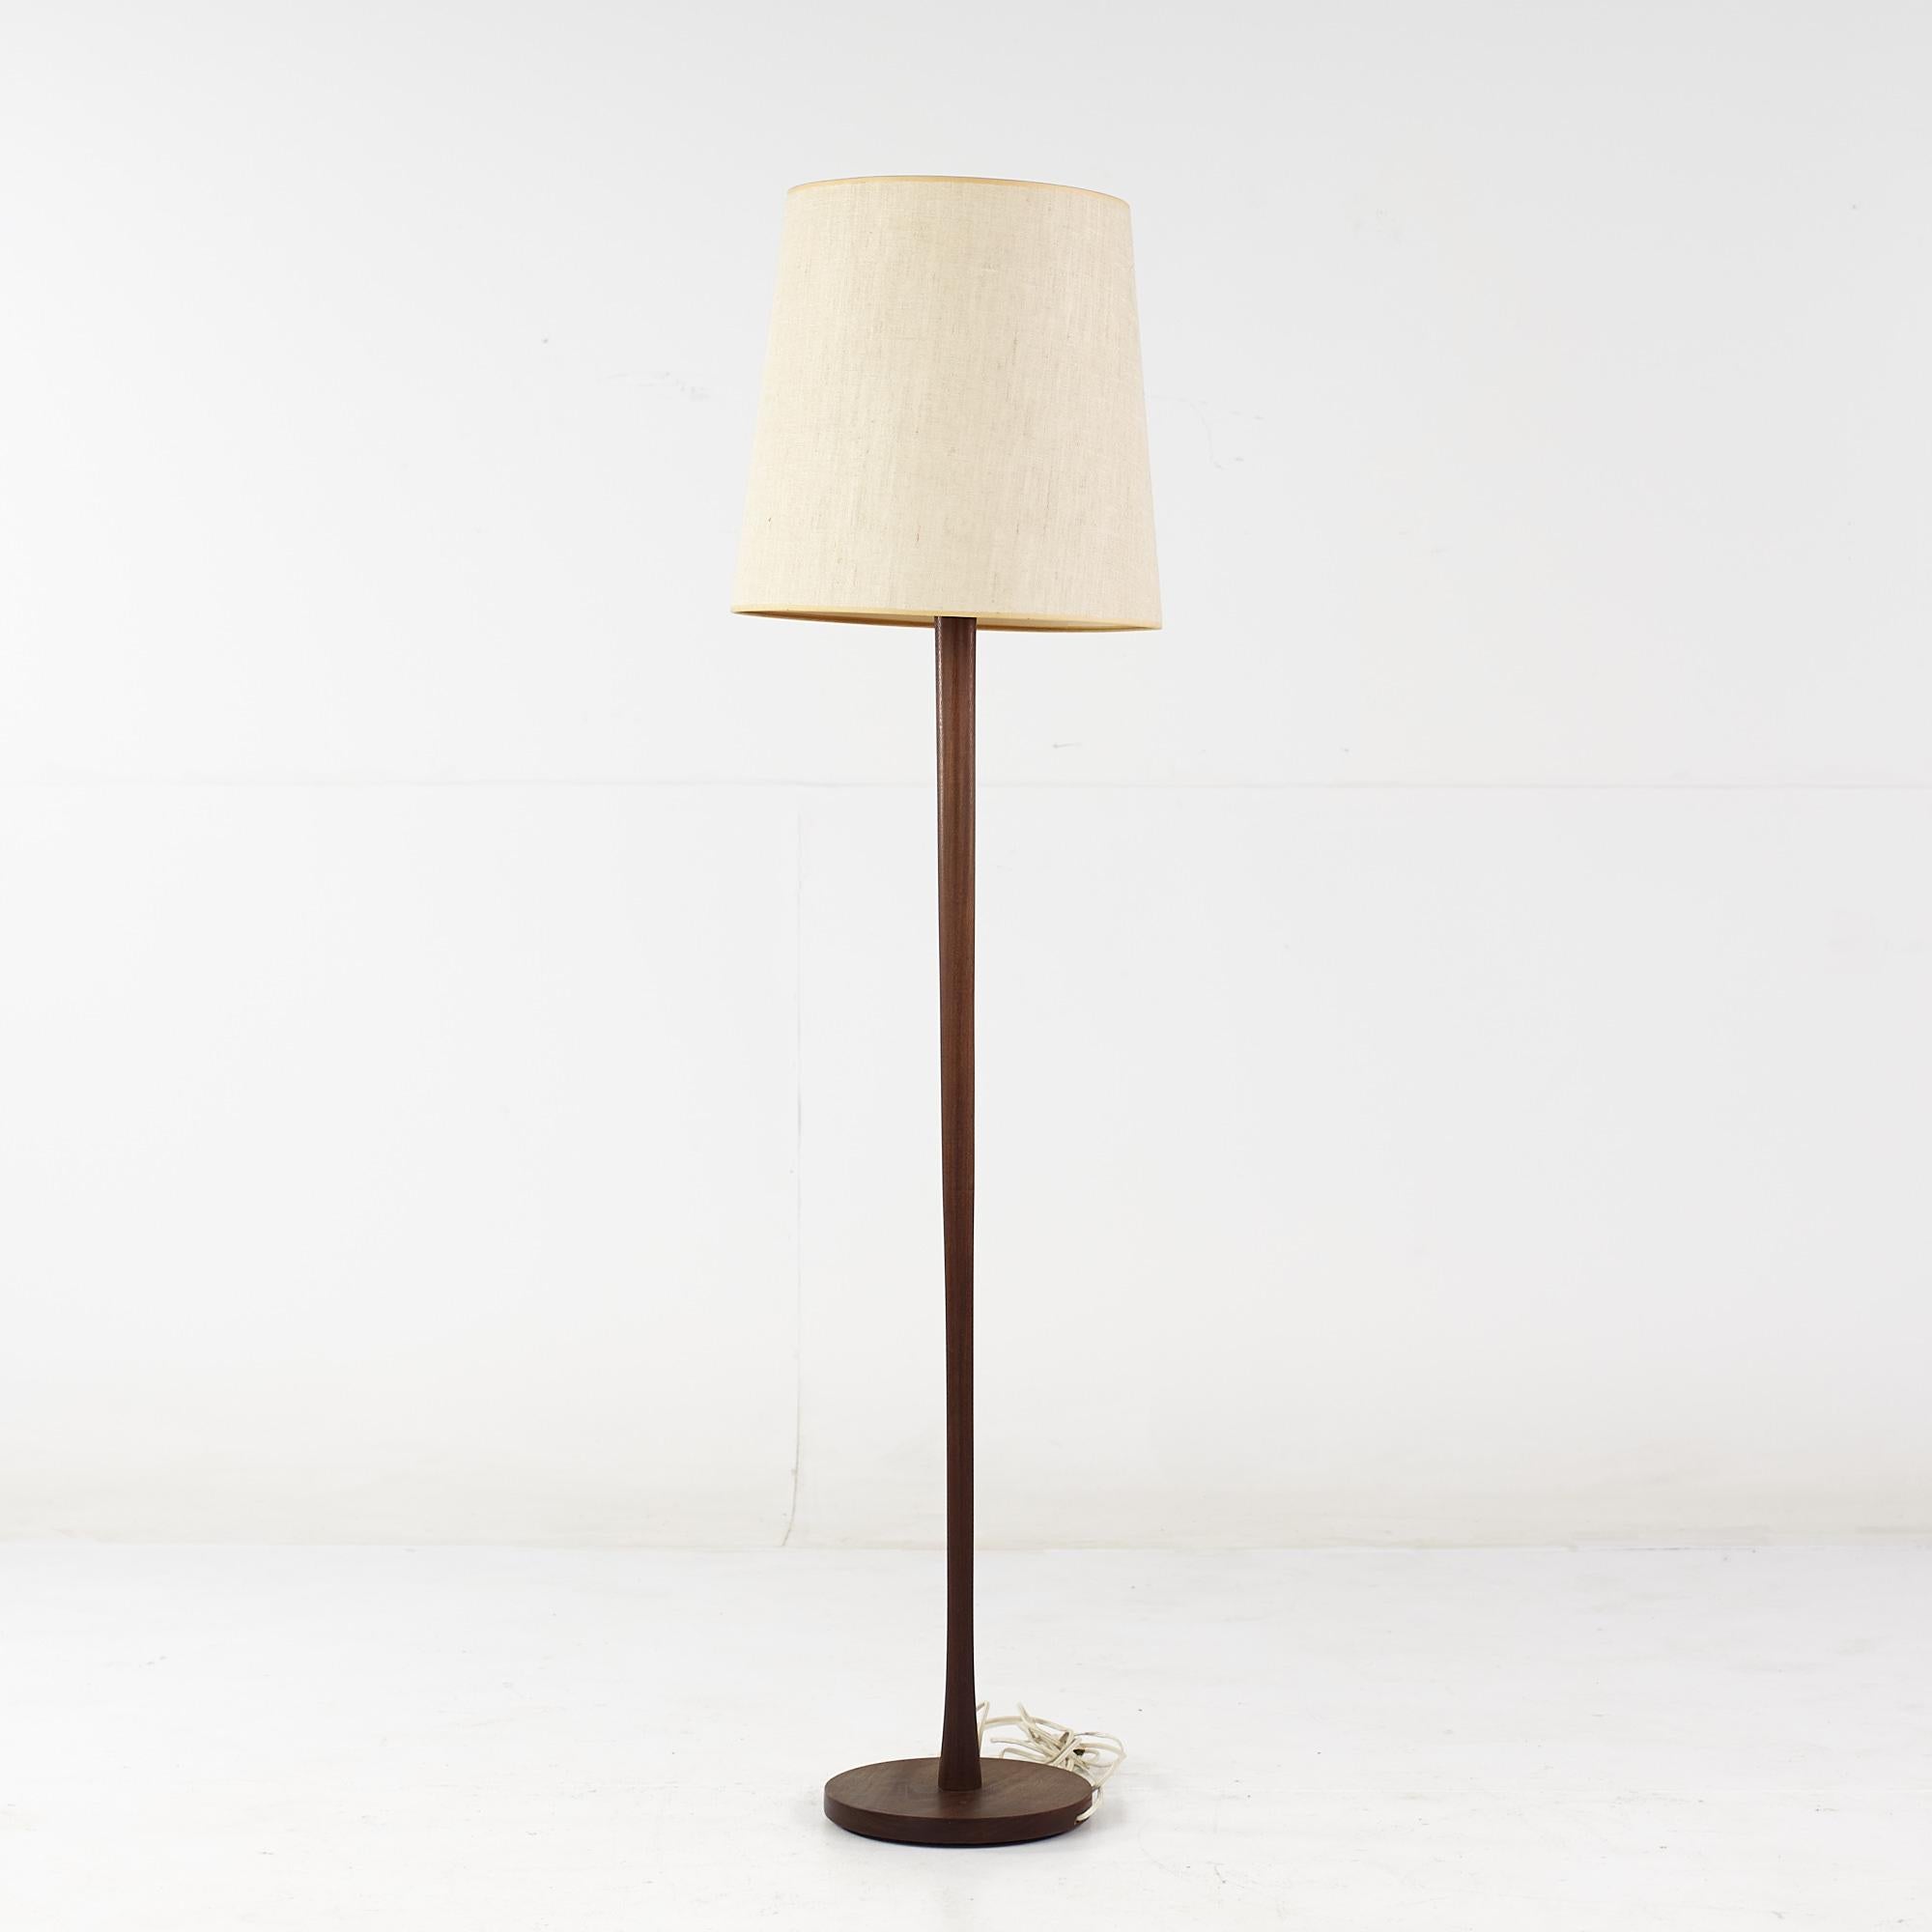 Mid Century teak floor lamp

This lamp measures: 15 wide x 15 deep x 58 inches high

Good Vintage Condition. Uneven finish at base and marks from wear on wood.

All pieces of furniture can be had in what we call restored vintage condition.